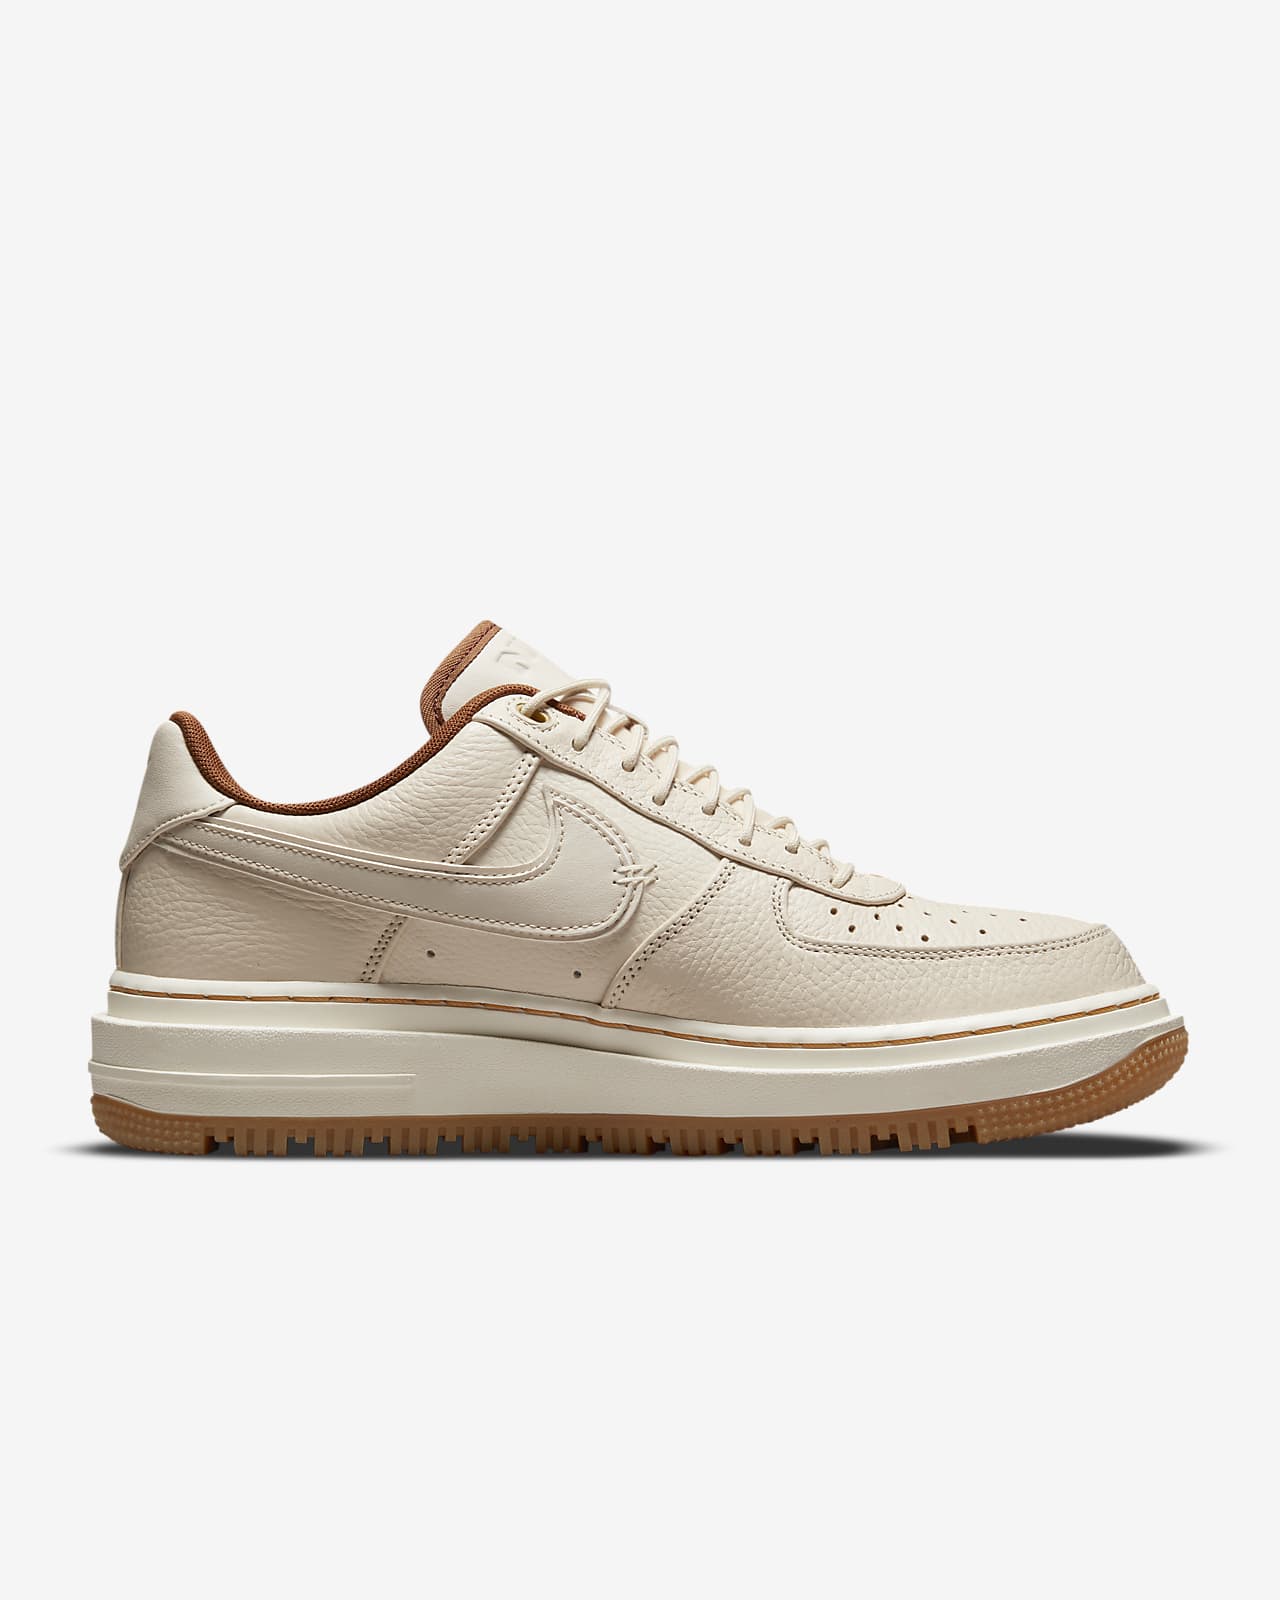 Chaussures Nike Air Force 1 Luxe pour Homme. Nike LU